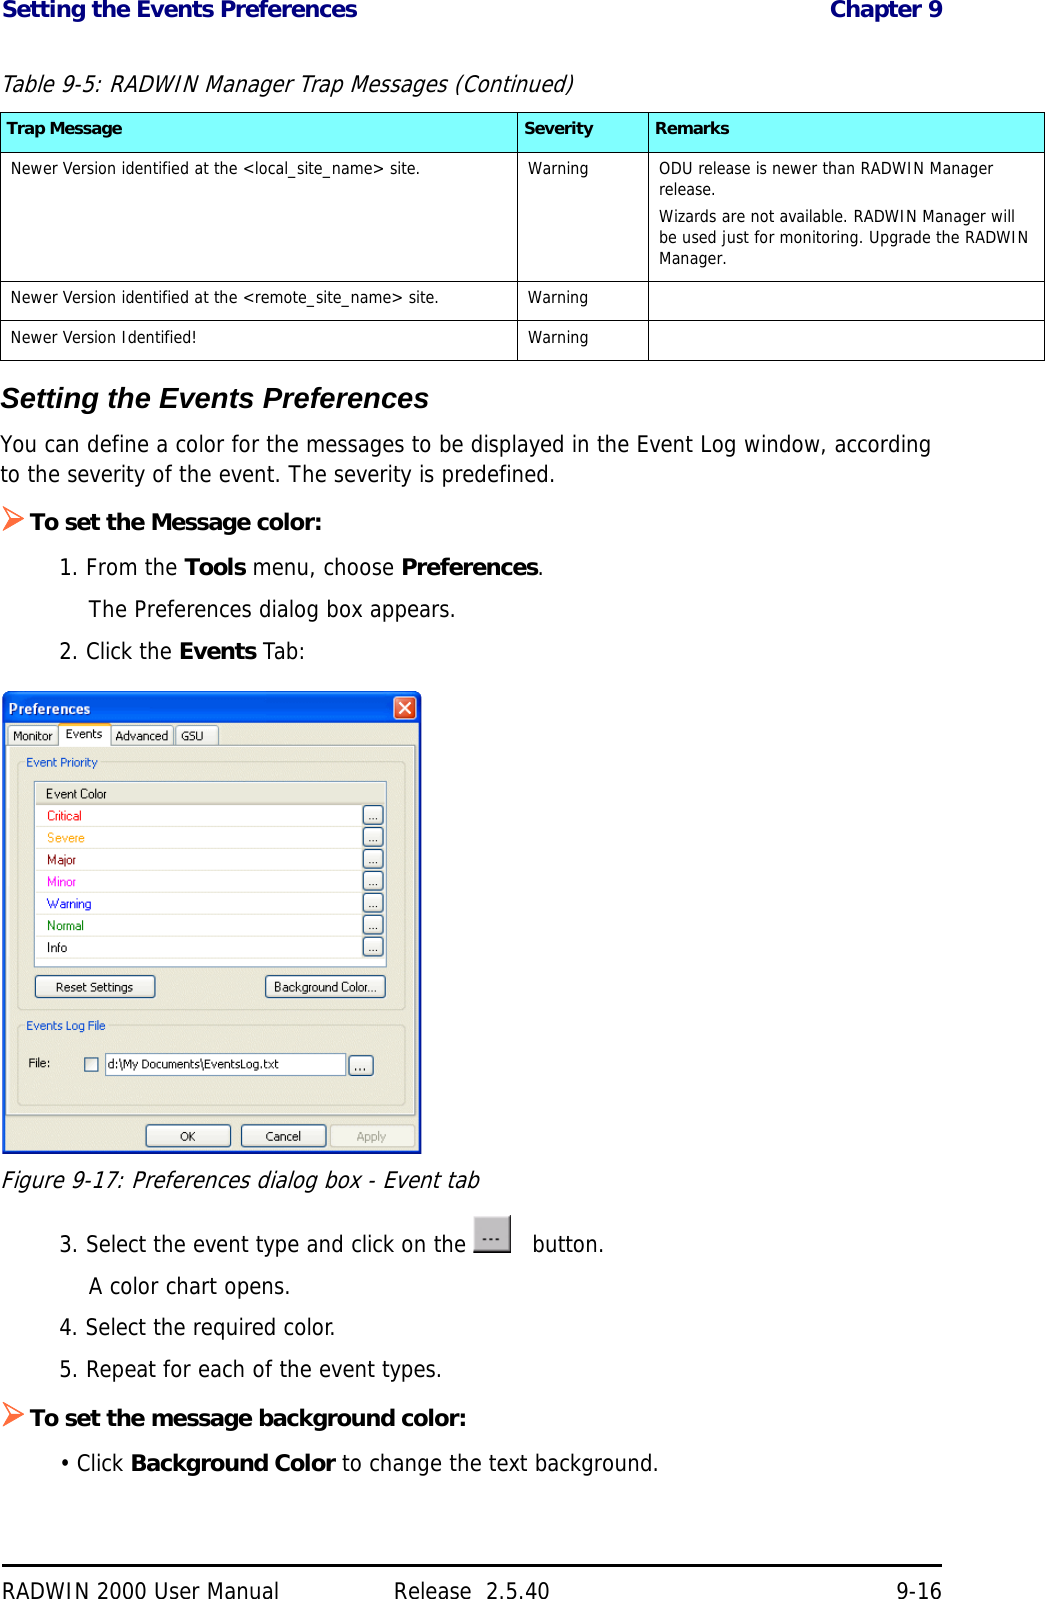 Setting the Events Preferences Chapter 9RADWIN 2000 User Manual Release  2.5.40 9-16Setting the Events PreferencesYou can define a color for the messages to be displayed in the Event Log window, according to the severity of the event. The severity is predefined.To set the Message color:1. From the Tools menu, choose Preferences.The Preferences dialog box appears.2. Click the Events Tab:Figure 9-17: Preferences dialog box - Event tab3. Select the event type and click on the     button.A color chart opens. 4. Select the required color.5. Repeat for each of the event types.To set the message background color:• Click Background Color to change the text background.Newer Version identified at the &lt;local_site_name&gt; site. Warning ODU release is newer than RADWIN Manager release.Wizards are not available. RADWIN Manager will be used just for monitoring. Upgrade the RADWIN Manager.Newer Version identified at the &lt;remote_site_name&gt; site. WarningNewer Version Identified! WarningTable 9-5: RADWIN Manager Trap Messages (Continued)Trap Message Severity Remarks